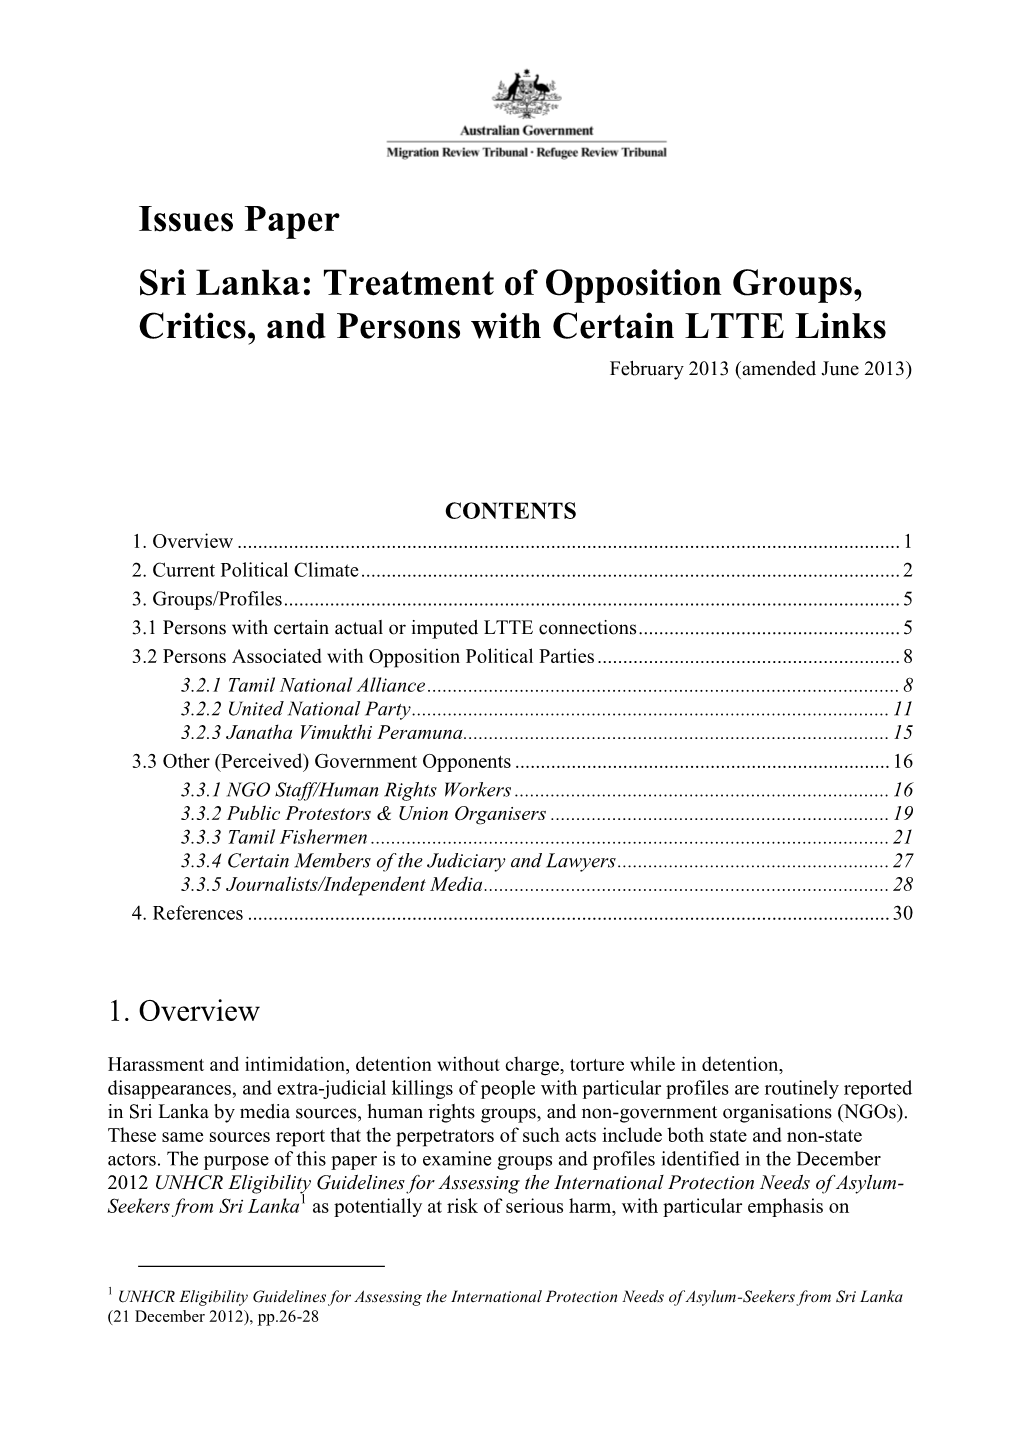 Issues Paper Sri Lanka: Treatment of Certain Government